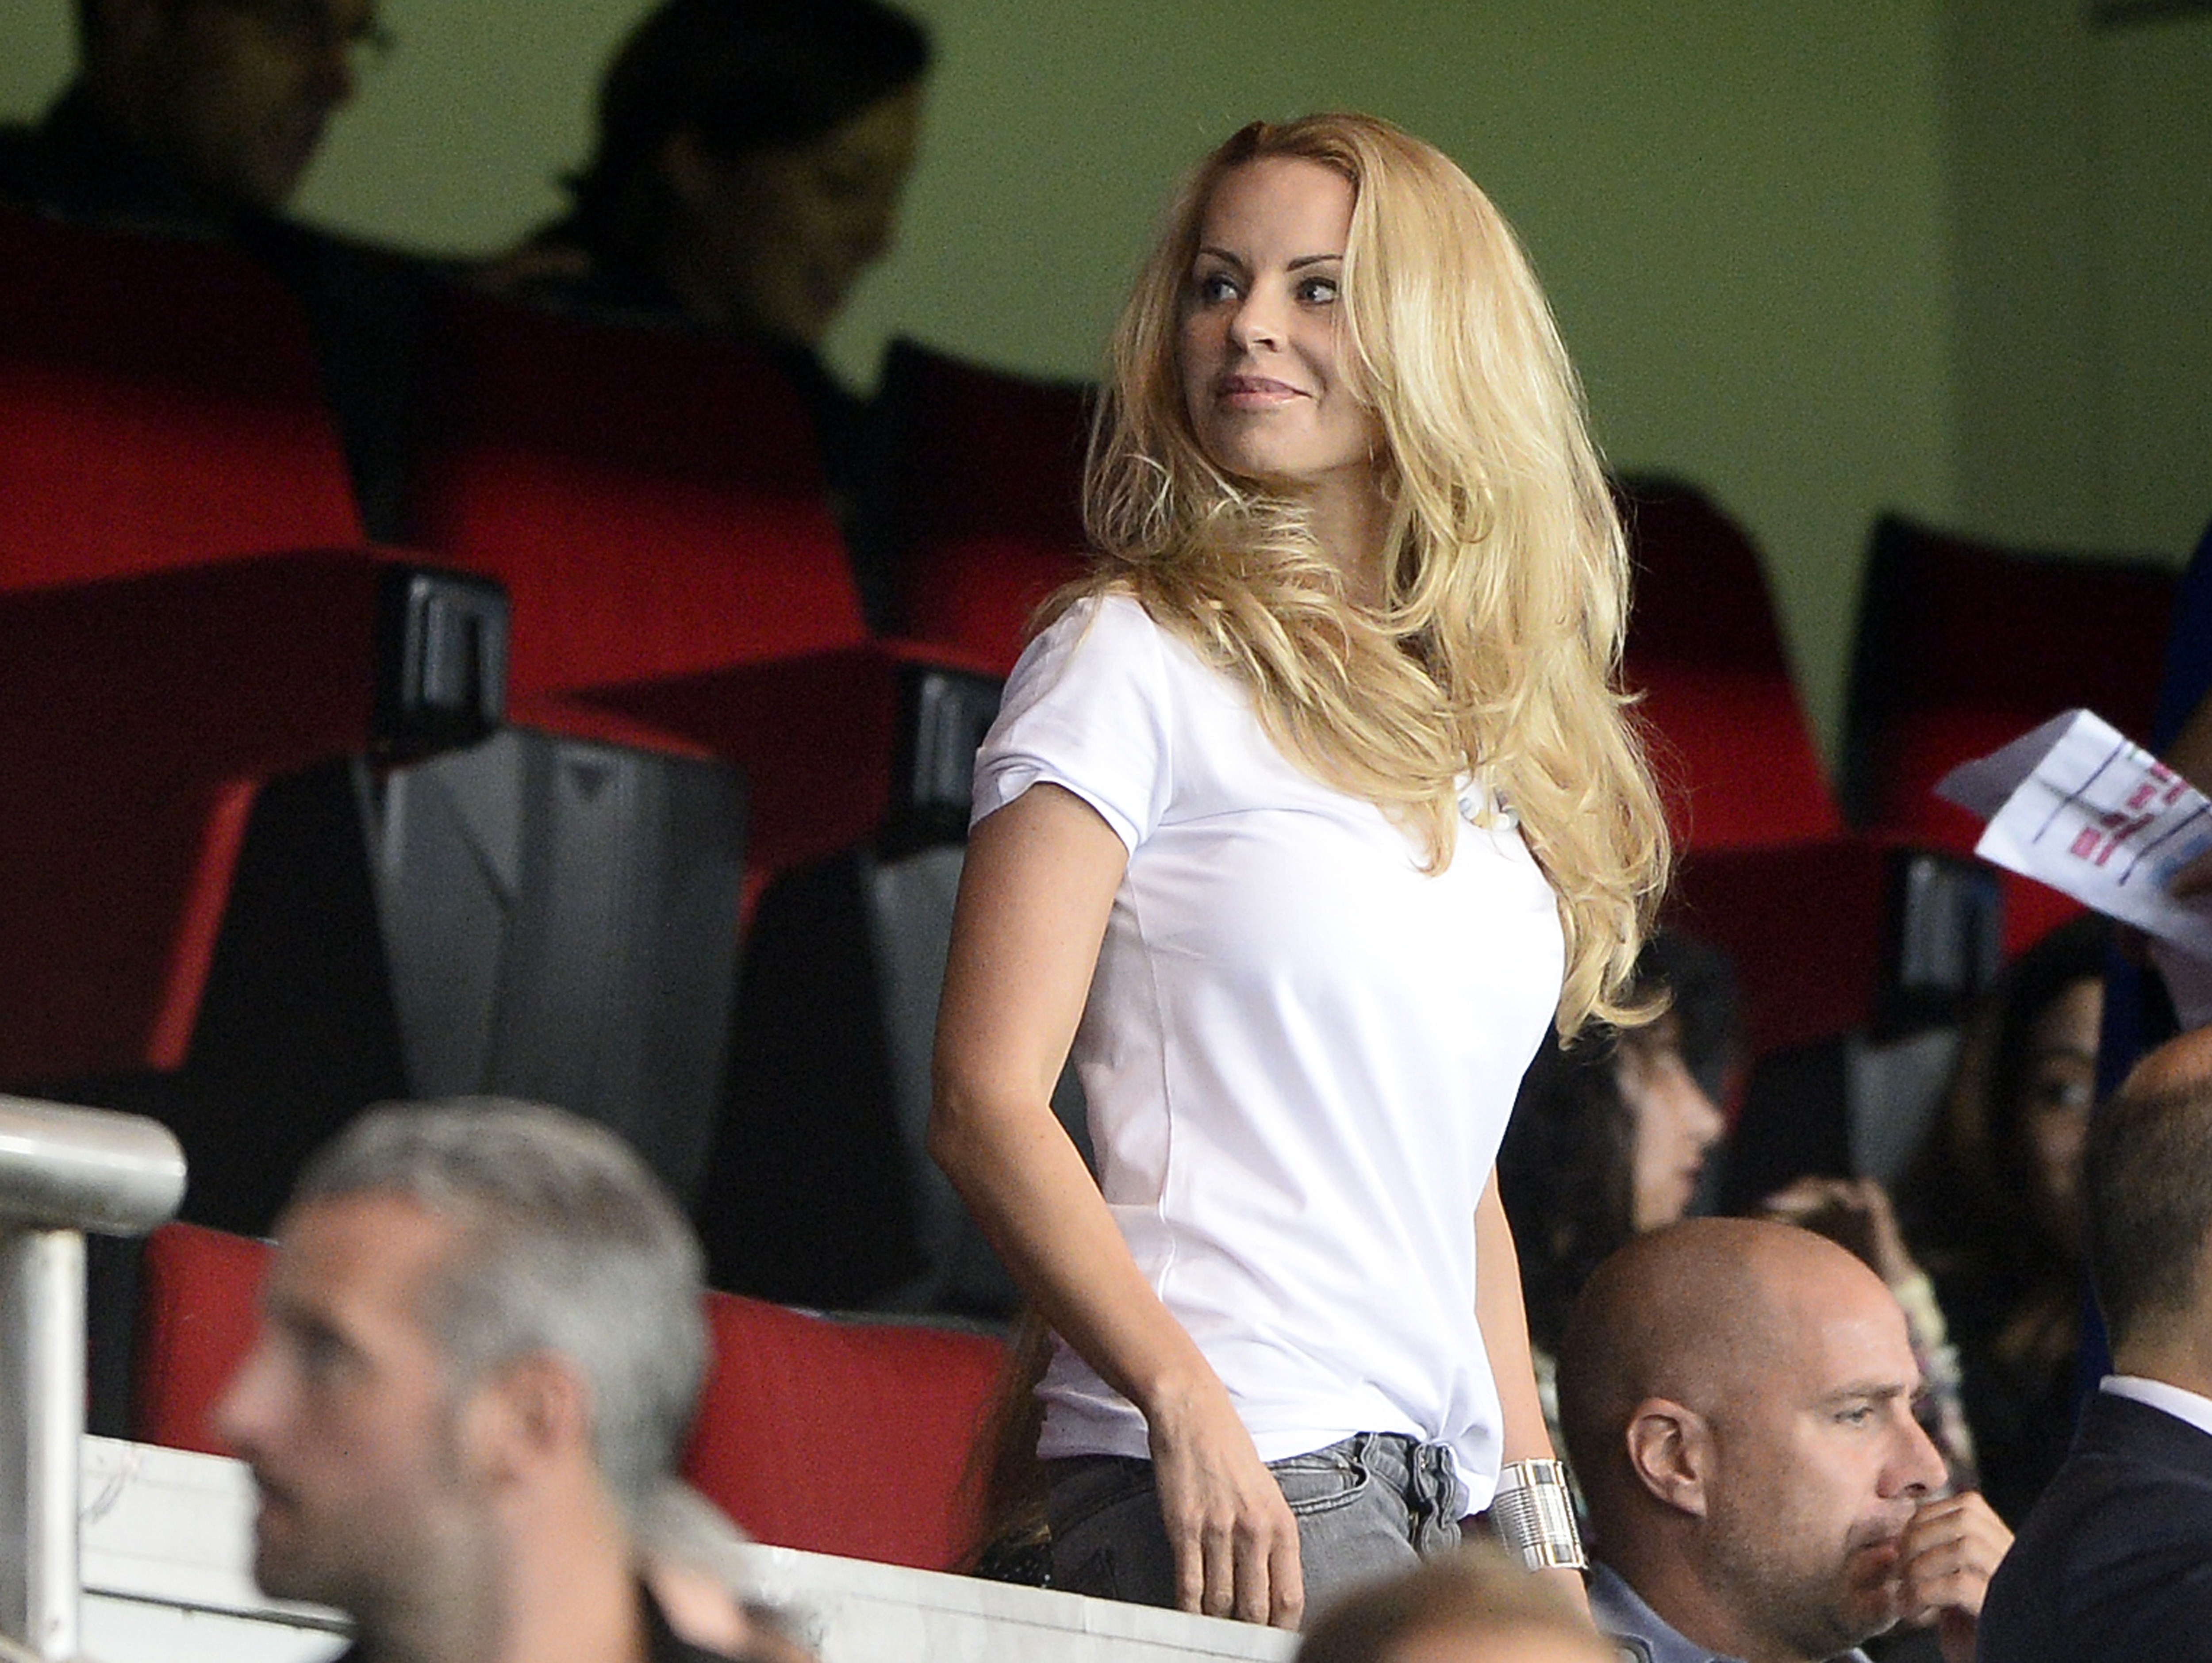 Helena Seger attend the UEFA Champions League football match between Paris Saint-Germain (PSG) and Barcelona at the Parc des Princes Stadium on September 30, 2014, in Paris, France. | Source: Getty Images